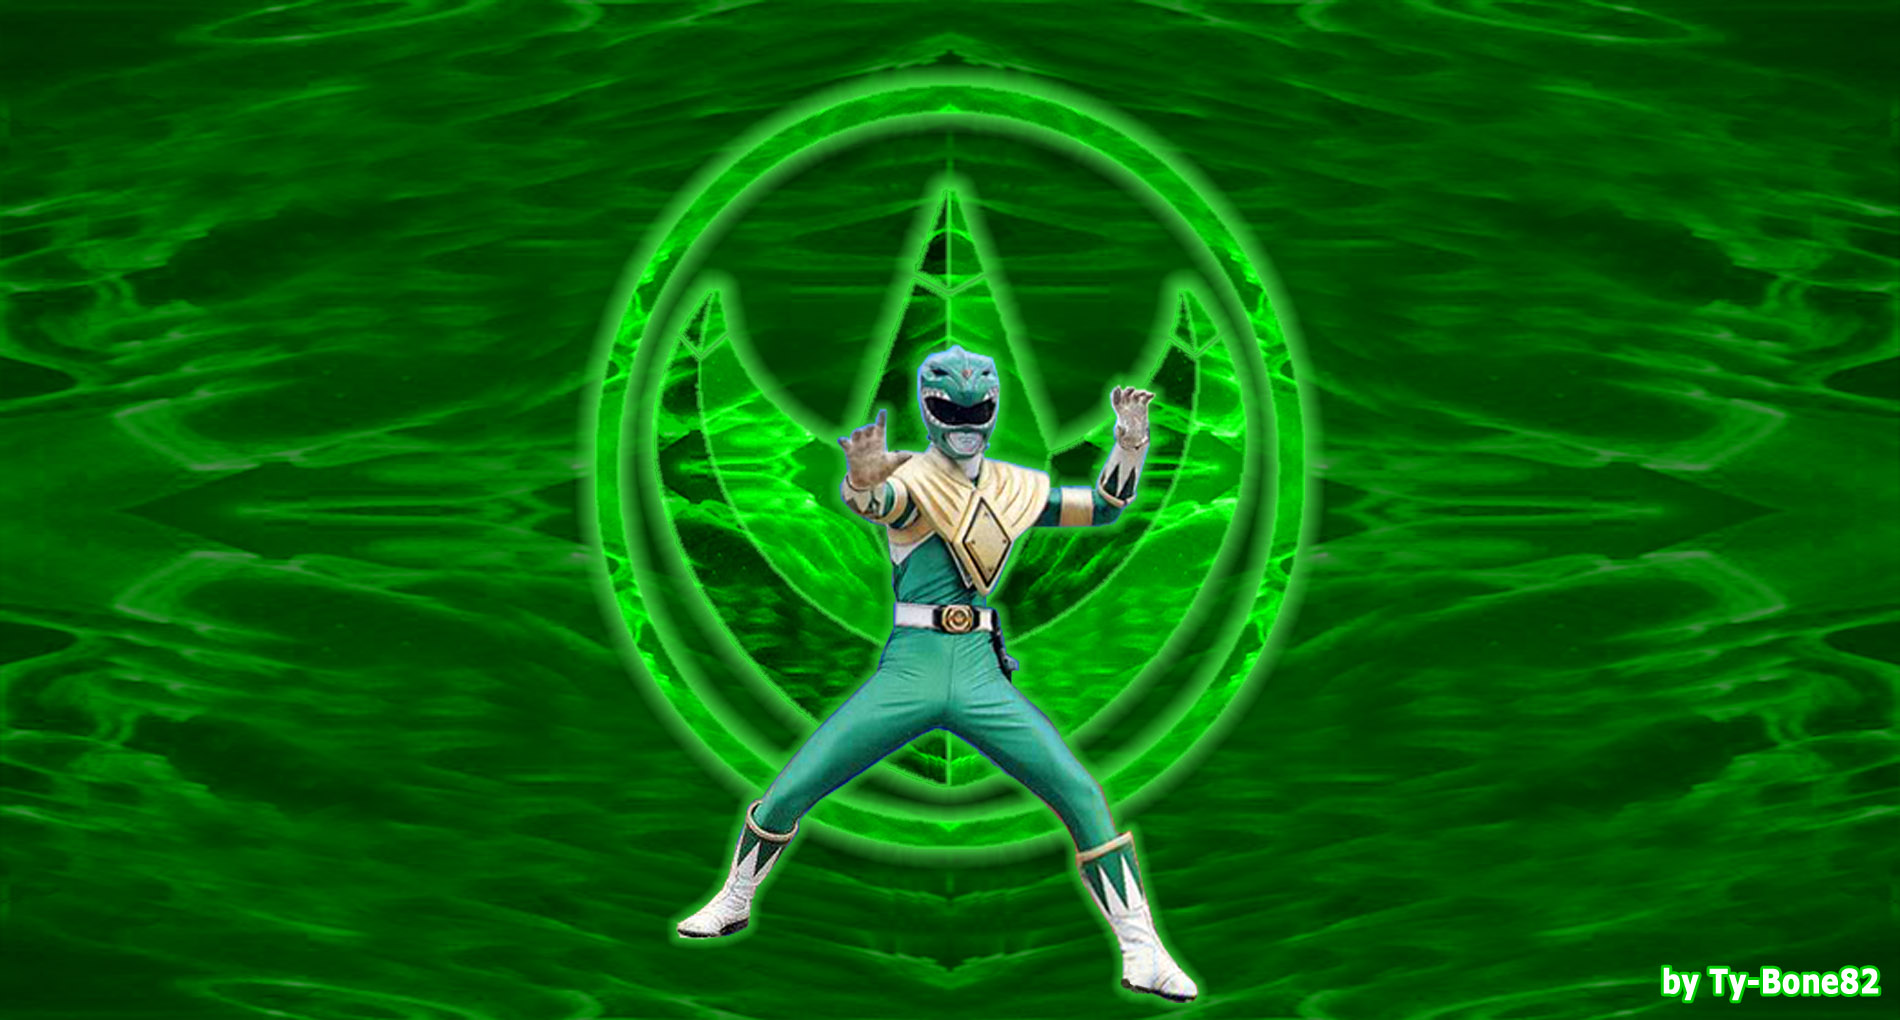 Mighty Morphin Power Rangers Green Ranger By Super Tybone82 On